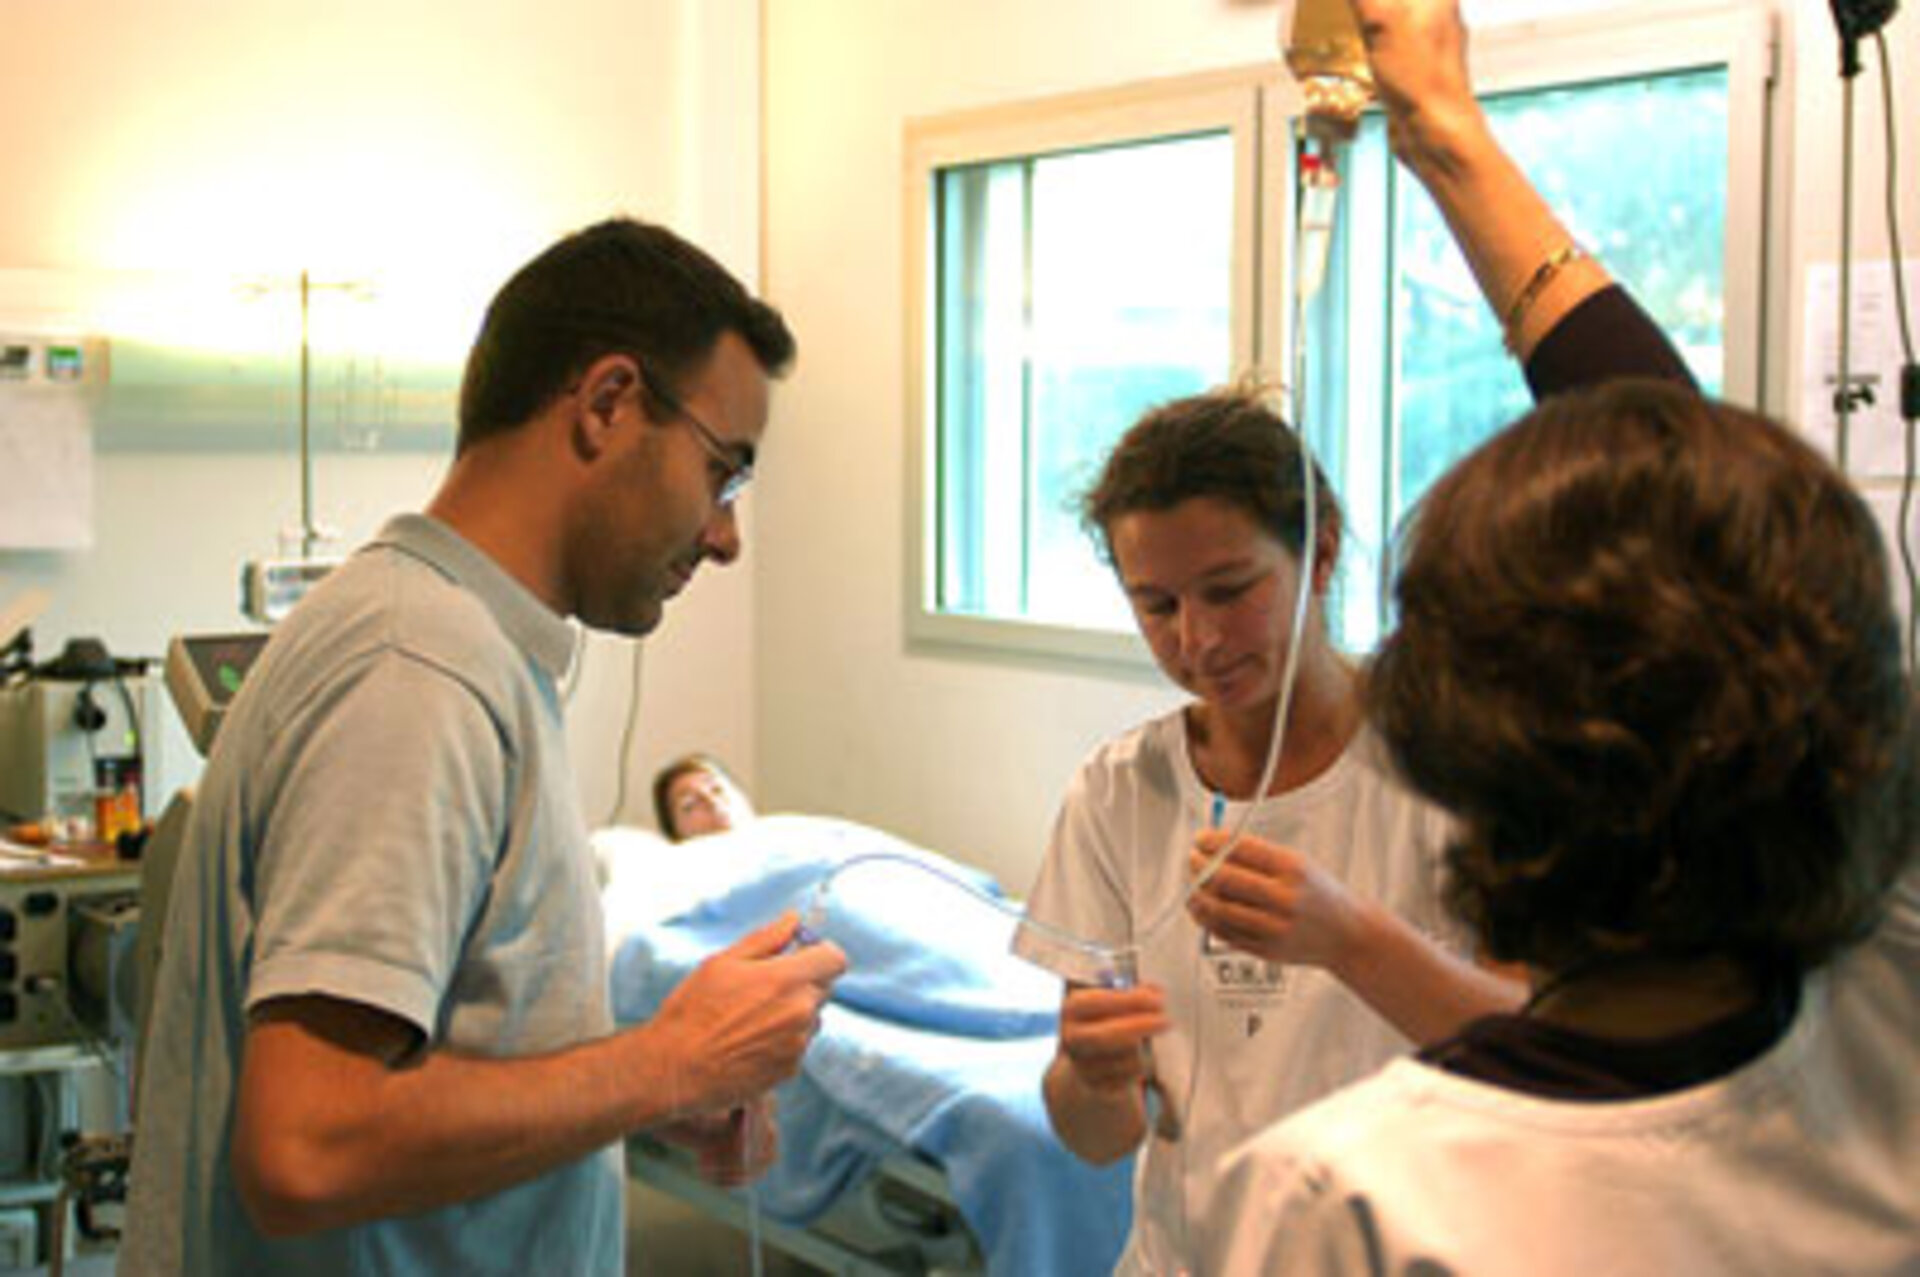 The volunteers of the WISE femal bedrest study underwent numerous medical tests